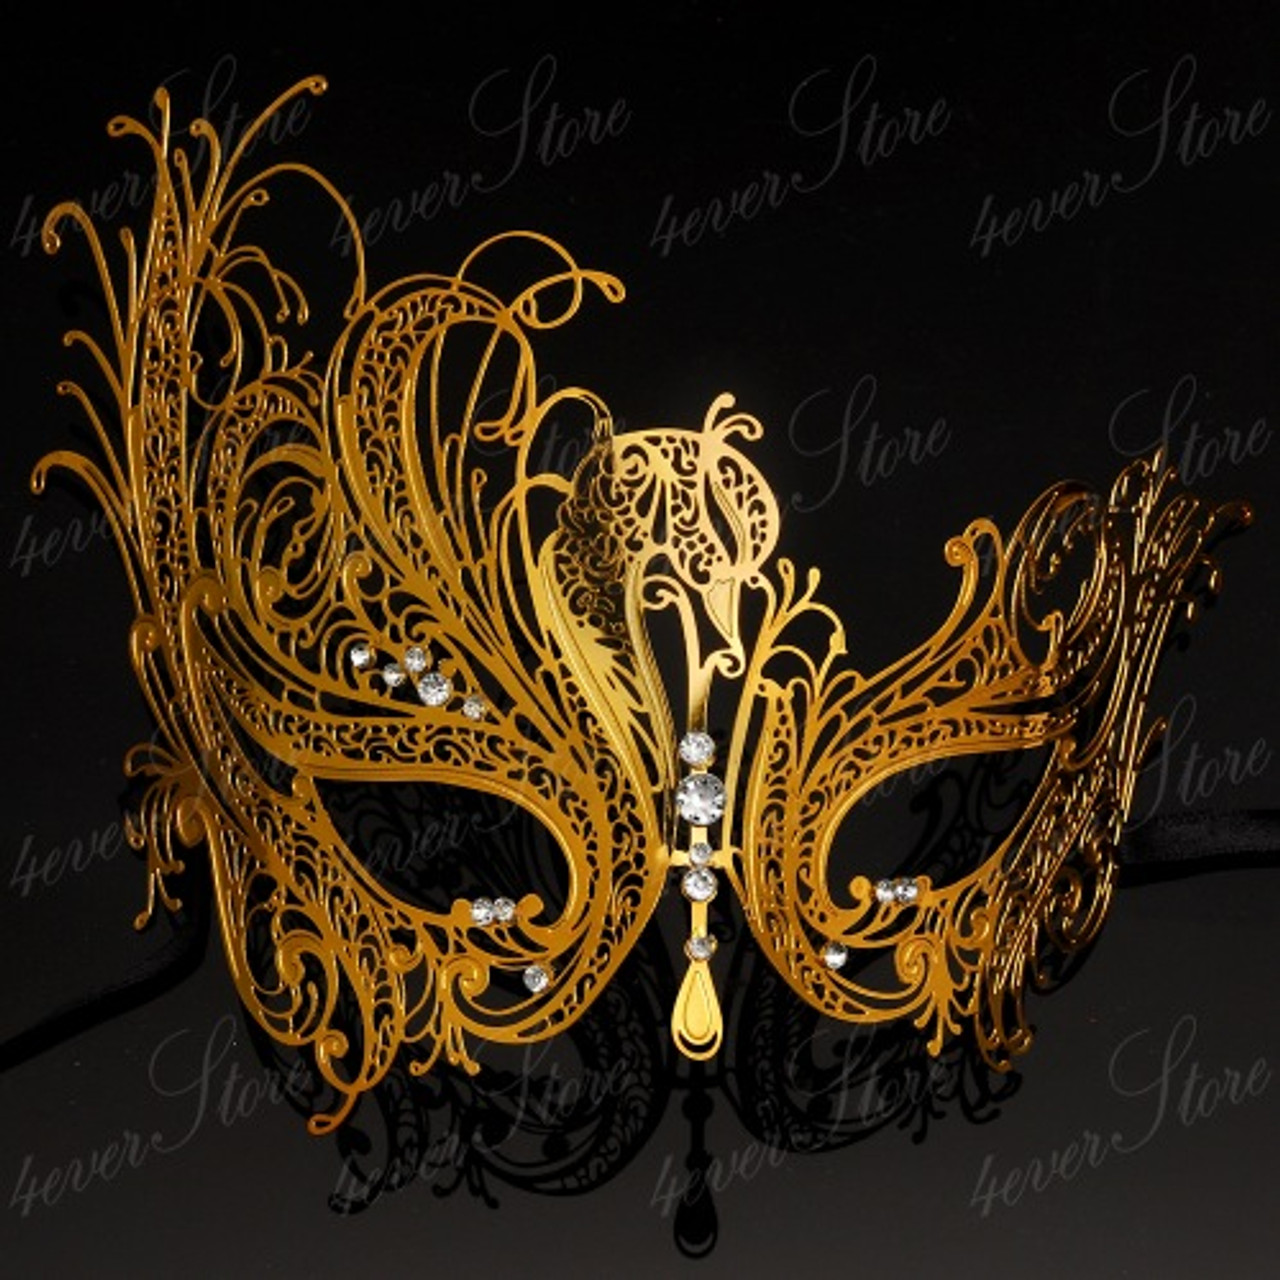 Masquerade Mask, Gold Masquerade Mask, Masquerade Ball Masks, Mardi Gras  Mask, Masquerade Ball Masks, Full Face Lace Metal Mask 